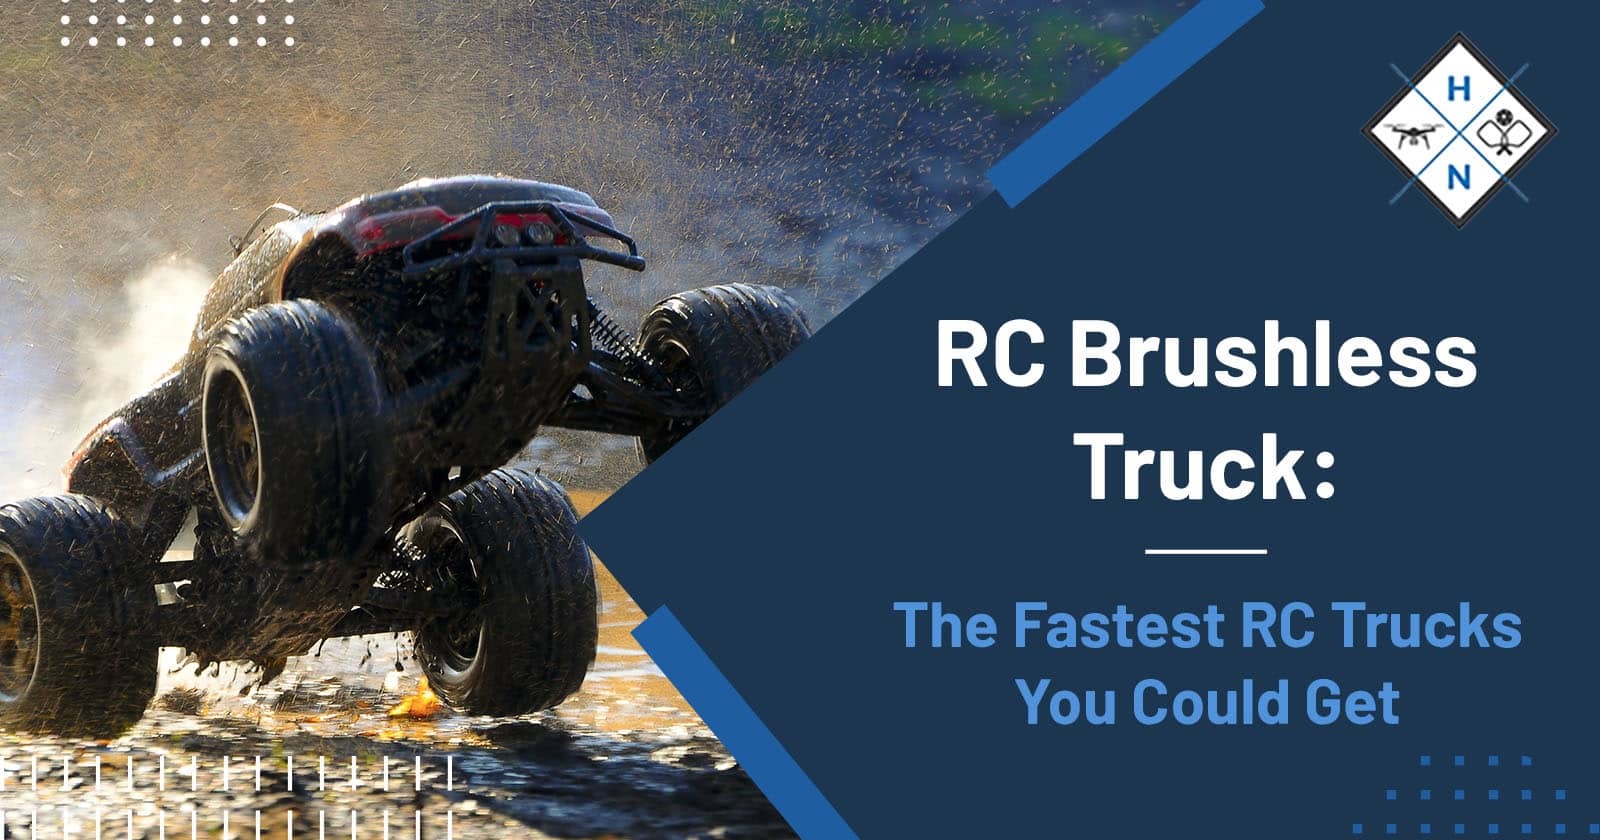 RC Brushless Truck: The Fastest RC Trucks You Could Get